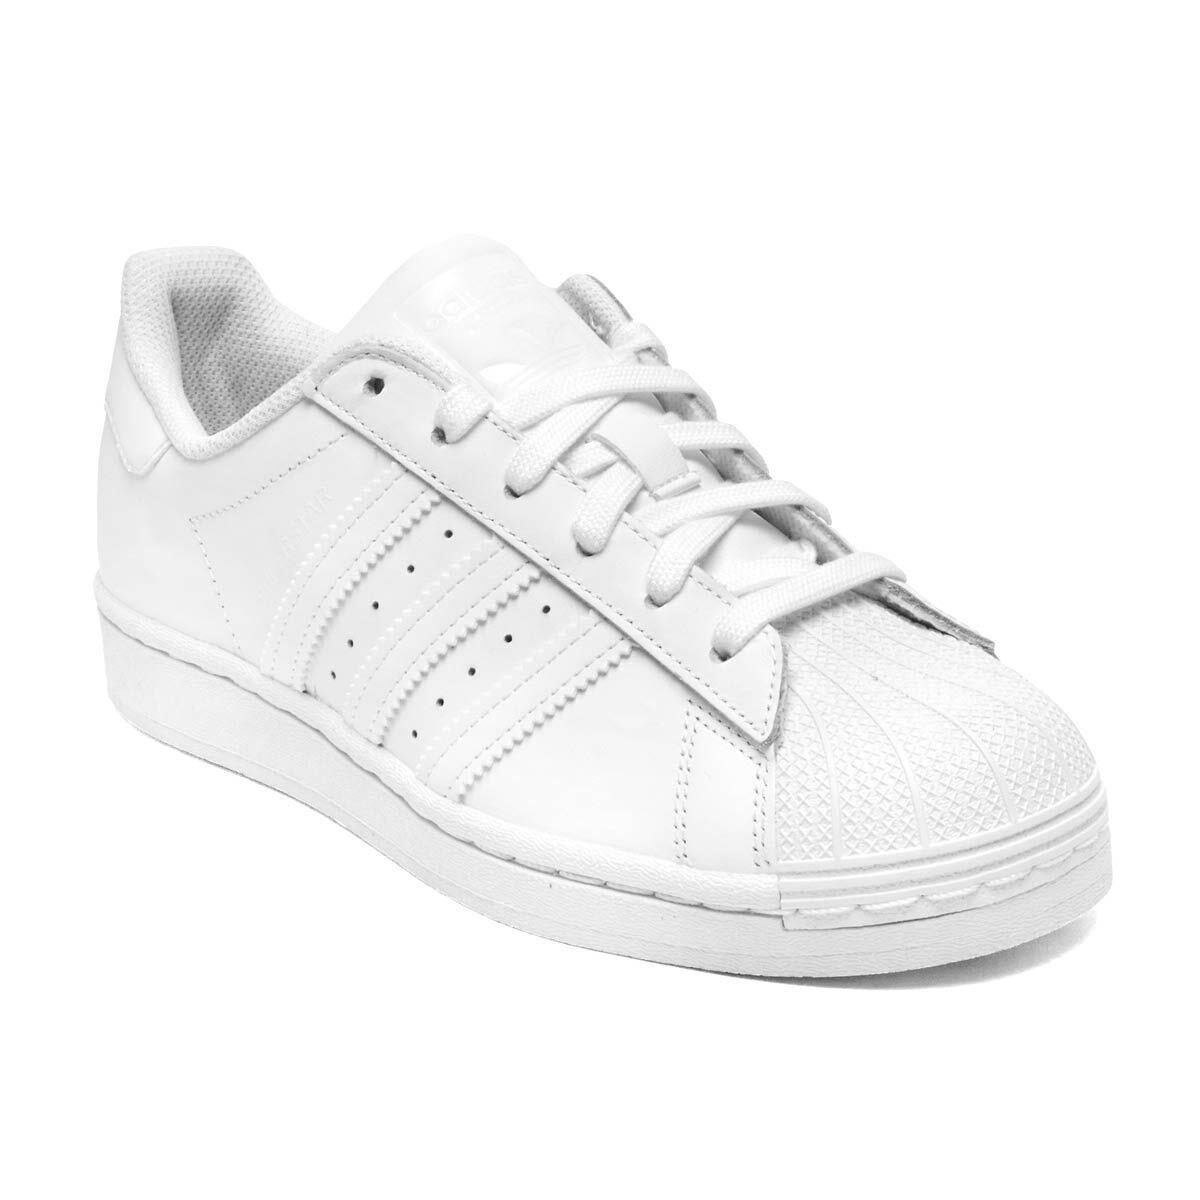 Adidas Youth Superstar J Sneakers Cloud White / Cloud White / Cloud White